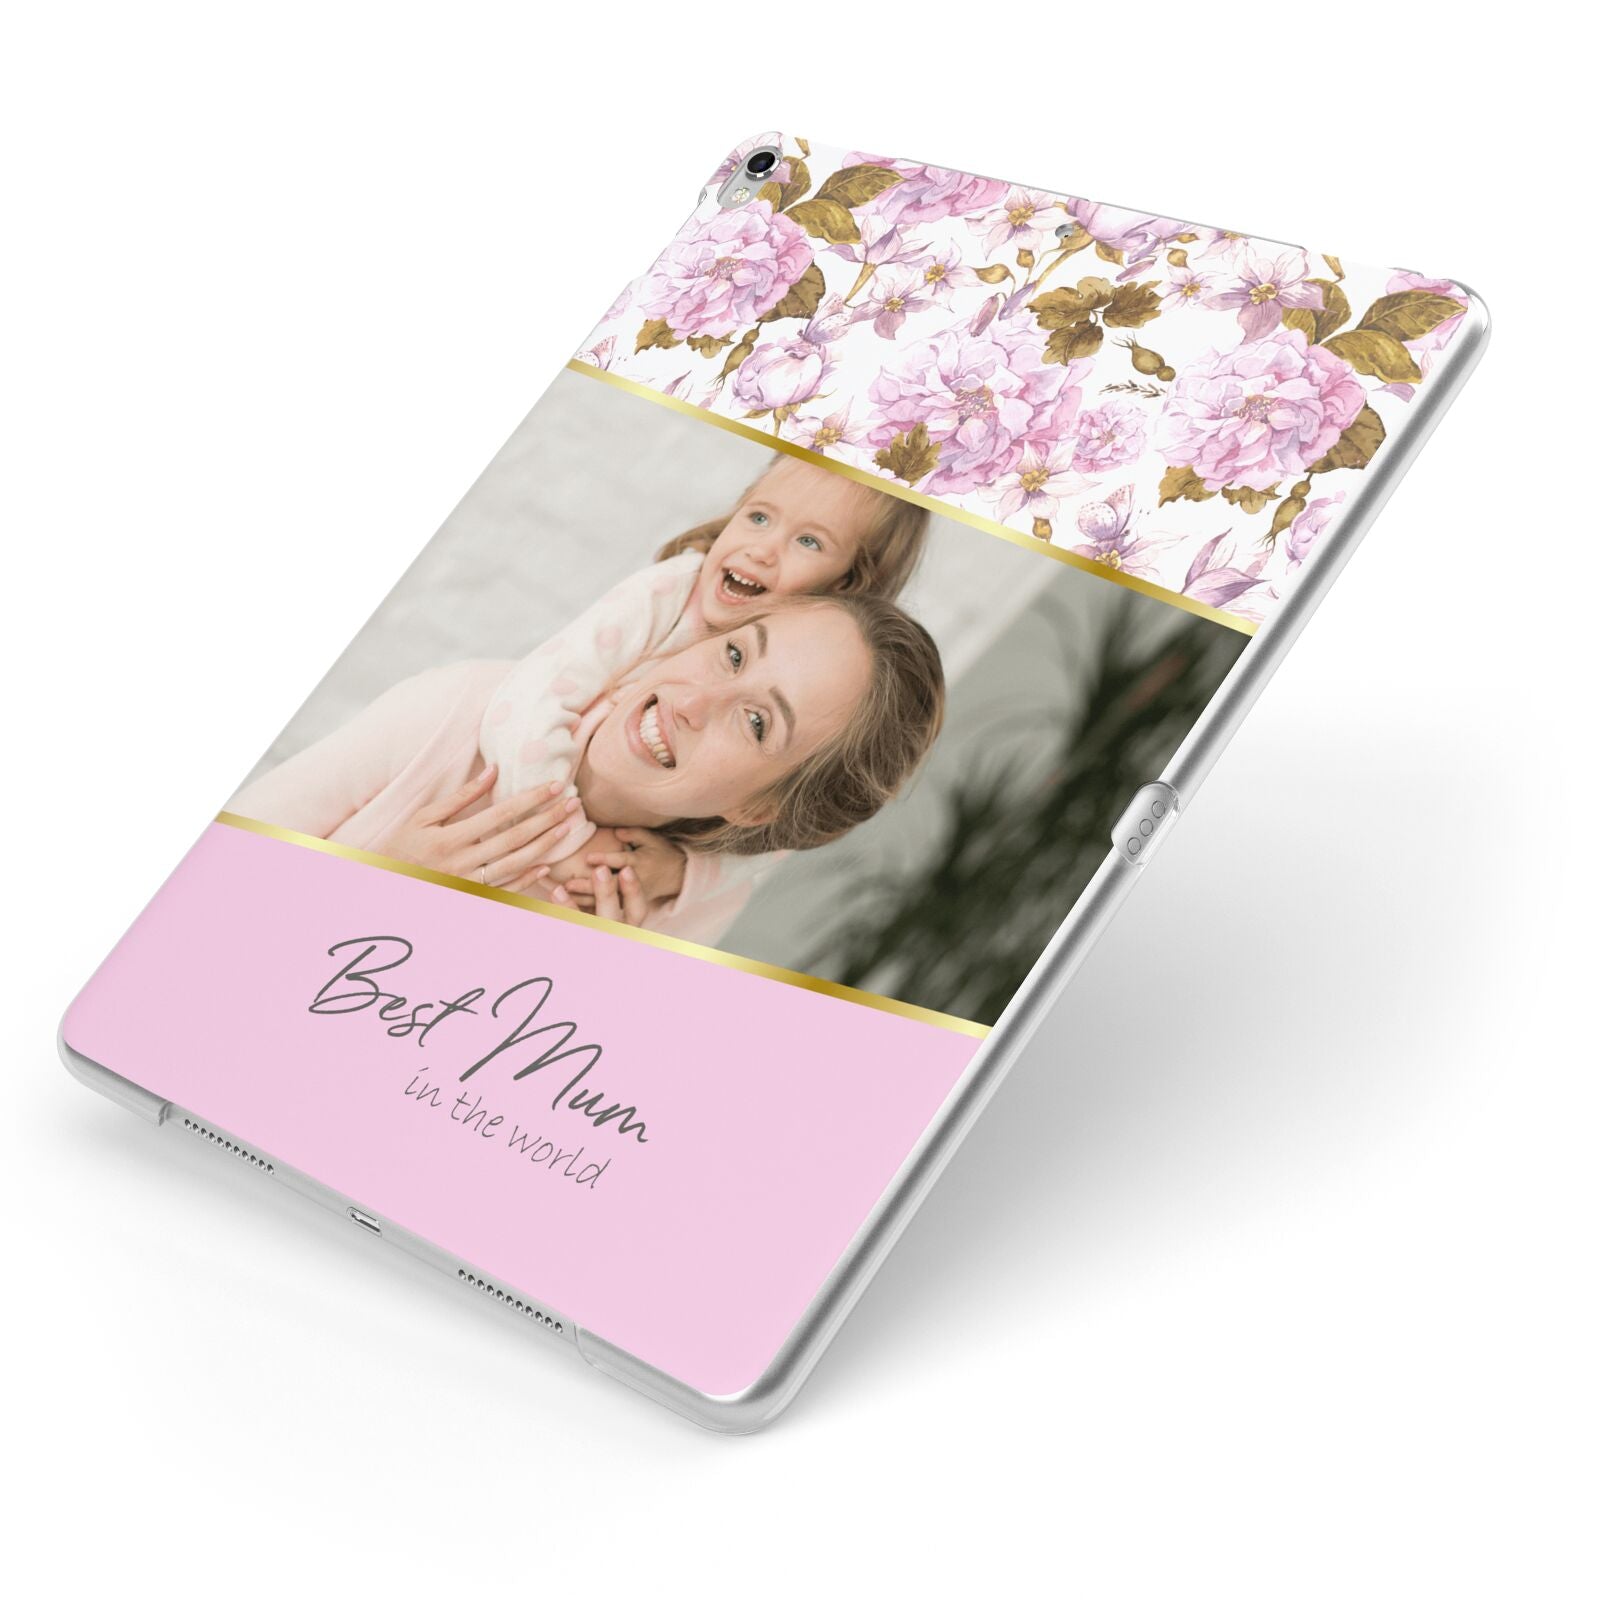 Personalised Love You Mum Apple iPad Case on Silver iPad Side View